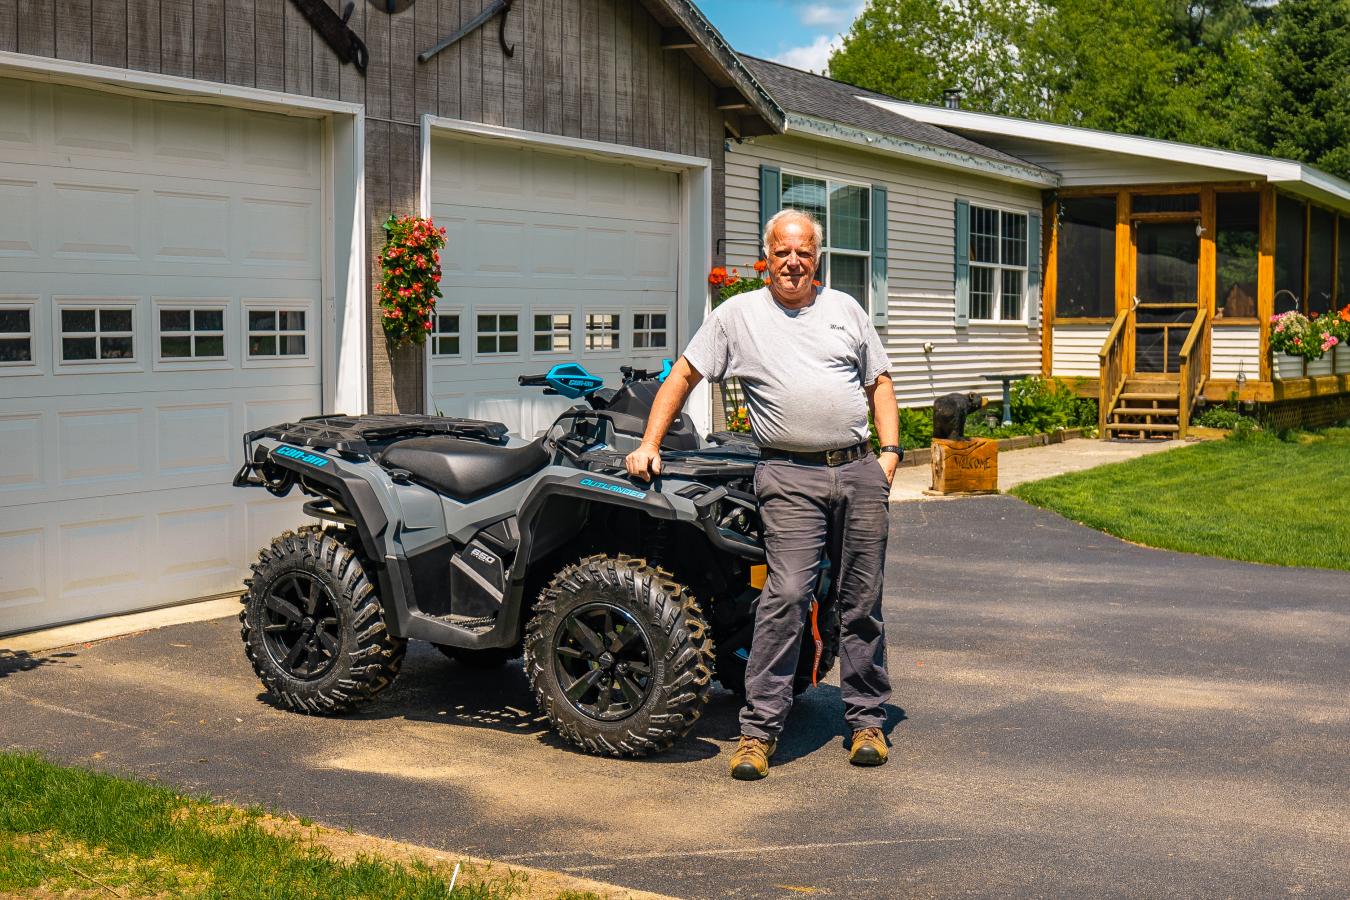 Adirondack regional federal credit union member with his new ATV at home after getting an ATV loan